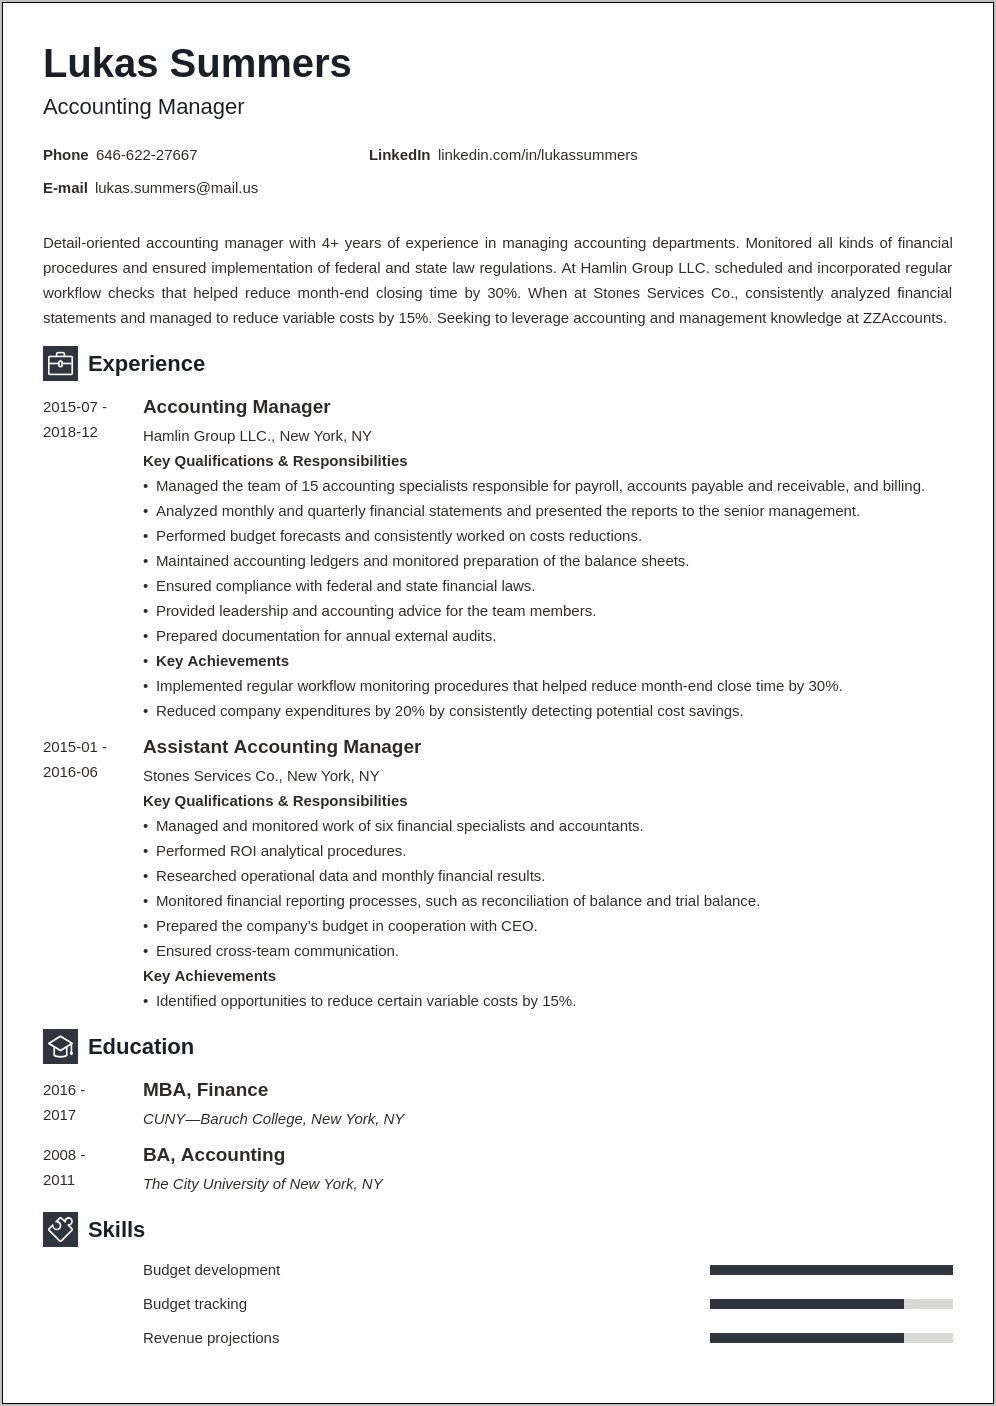 Resume Objective For Accounting Manager Position